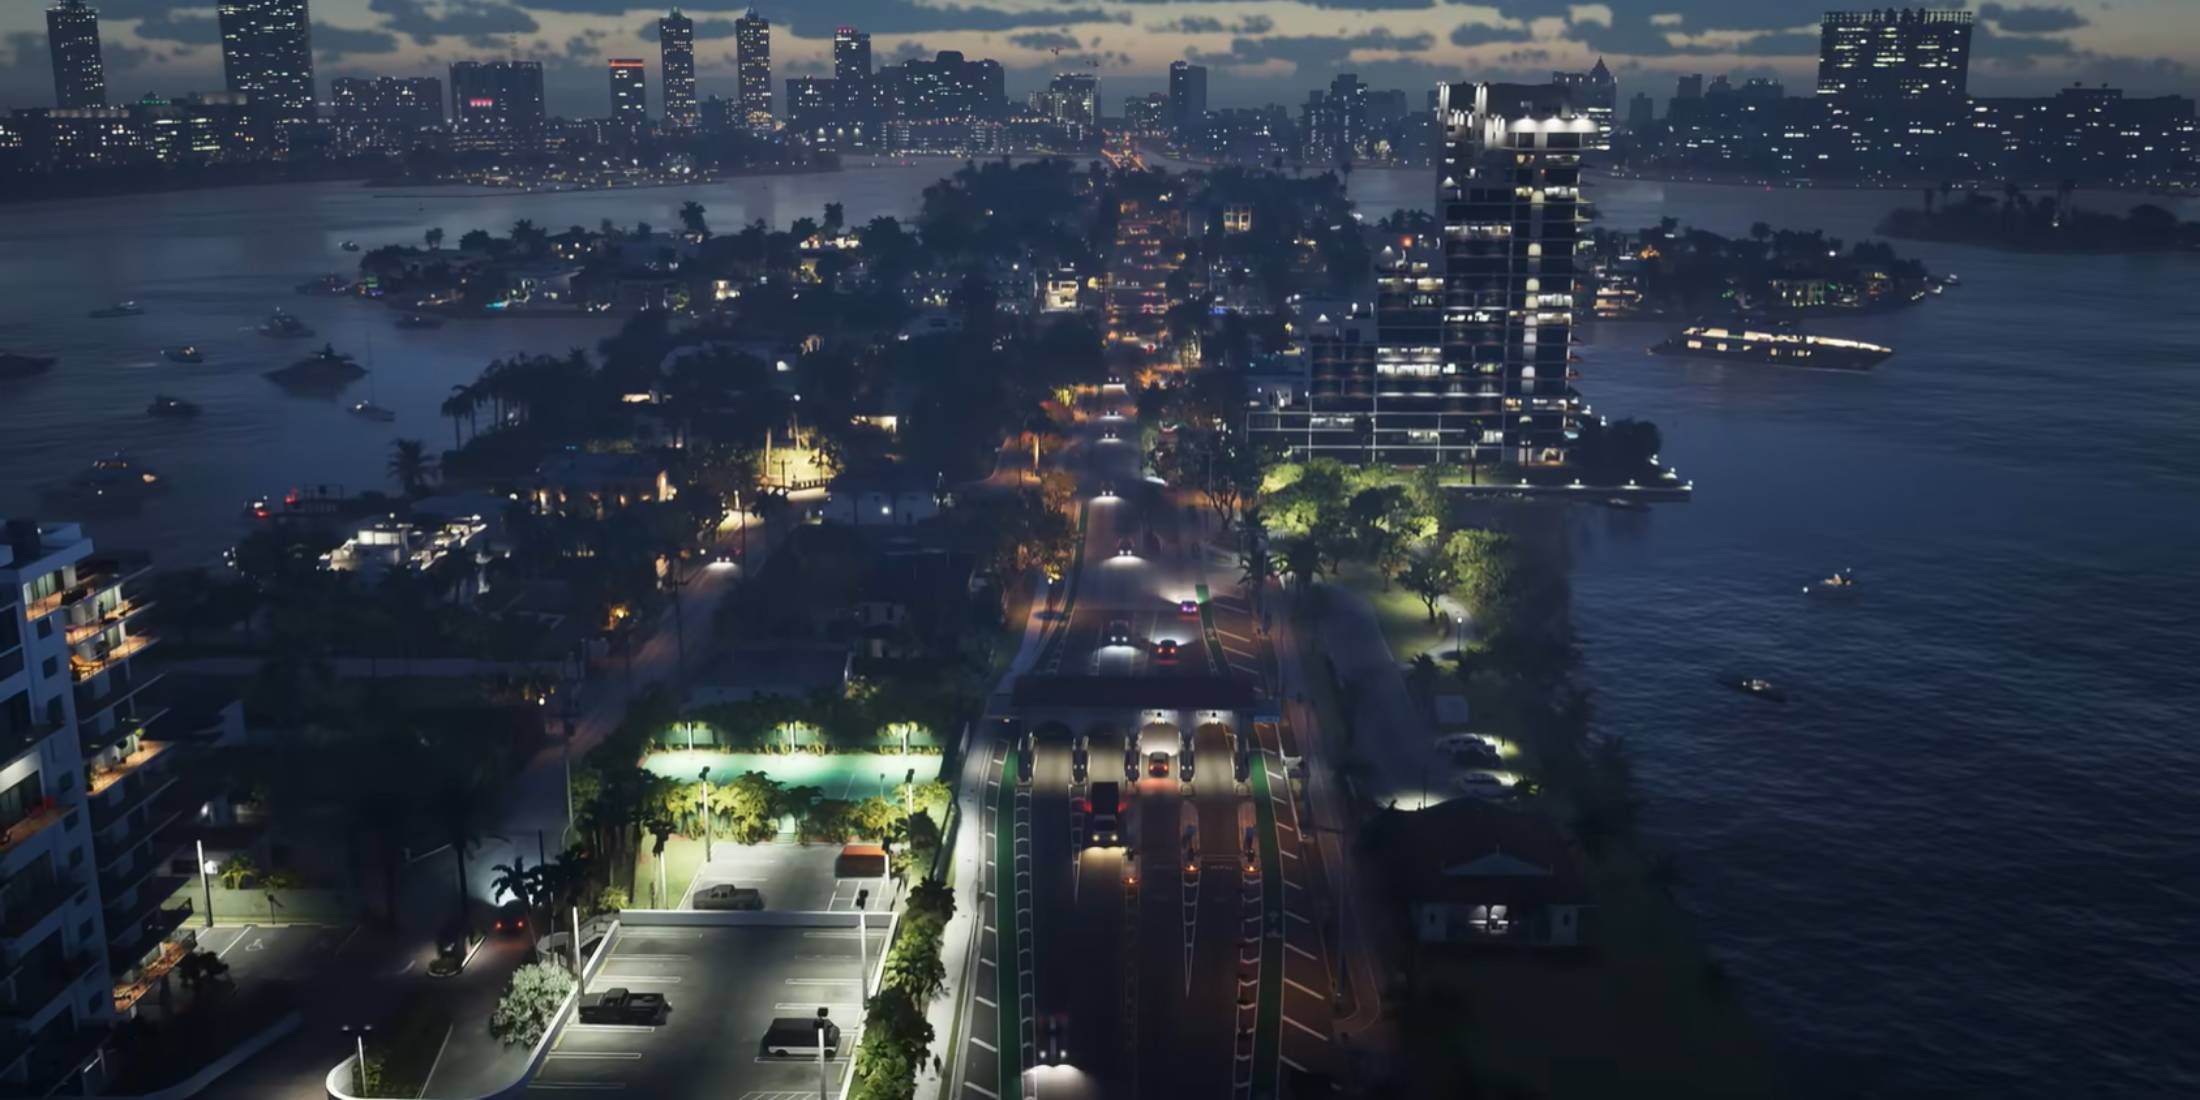 Vice City at night as seen in the Grand Theft Auto 5 trailer